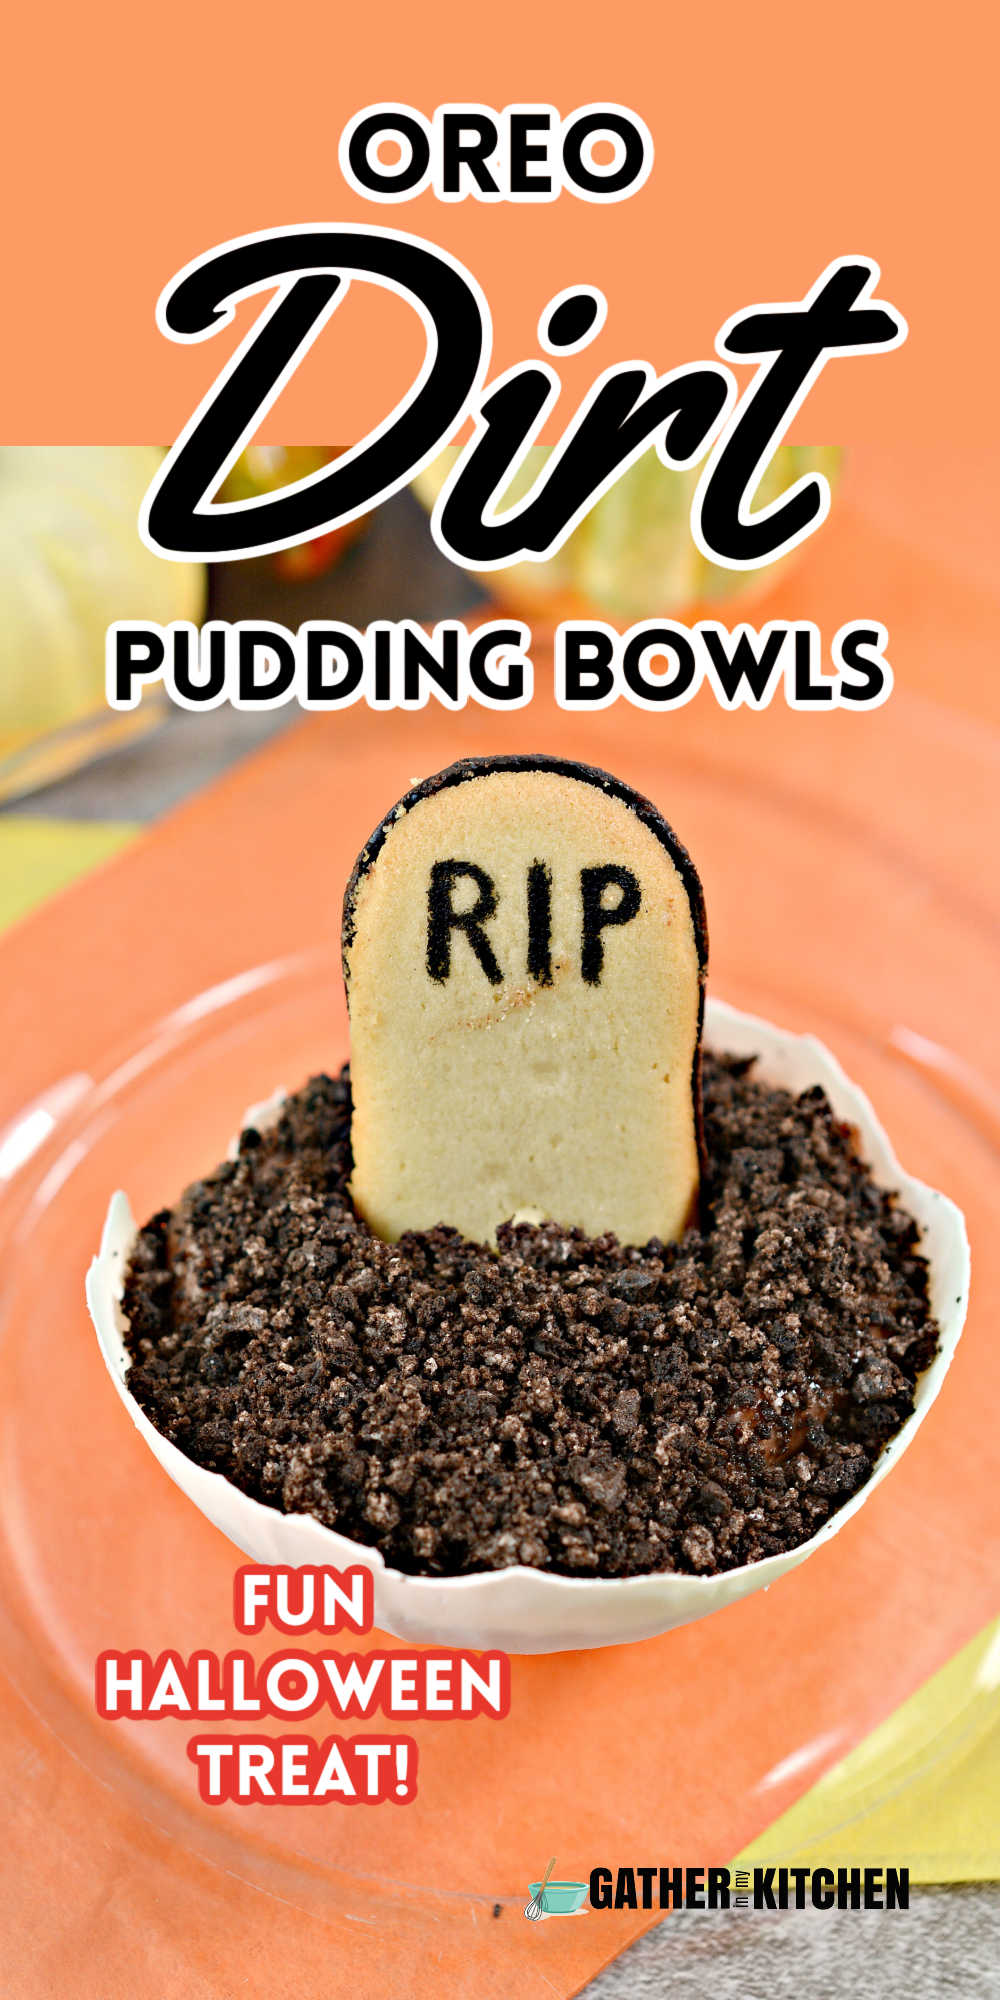 Pin image: top says "Oreo Dirt Pudding bowls" and bottom has a picture of the dirt pudding bowl.